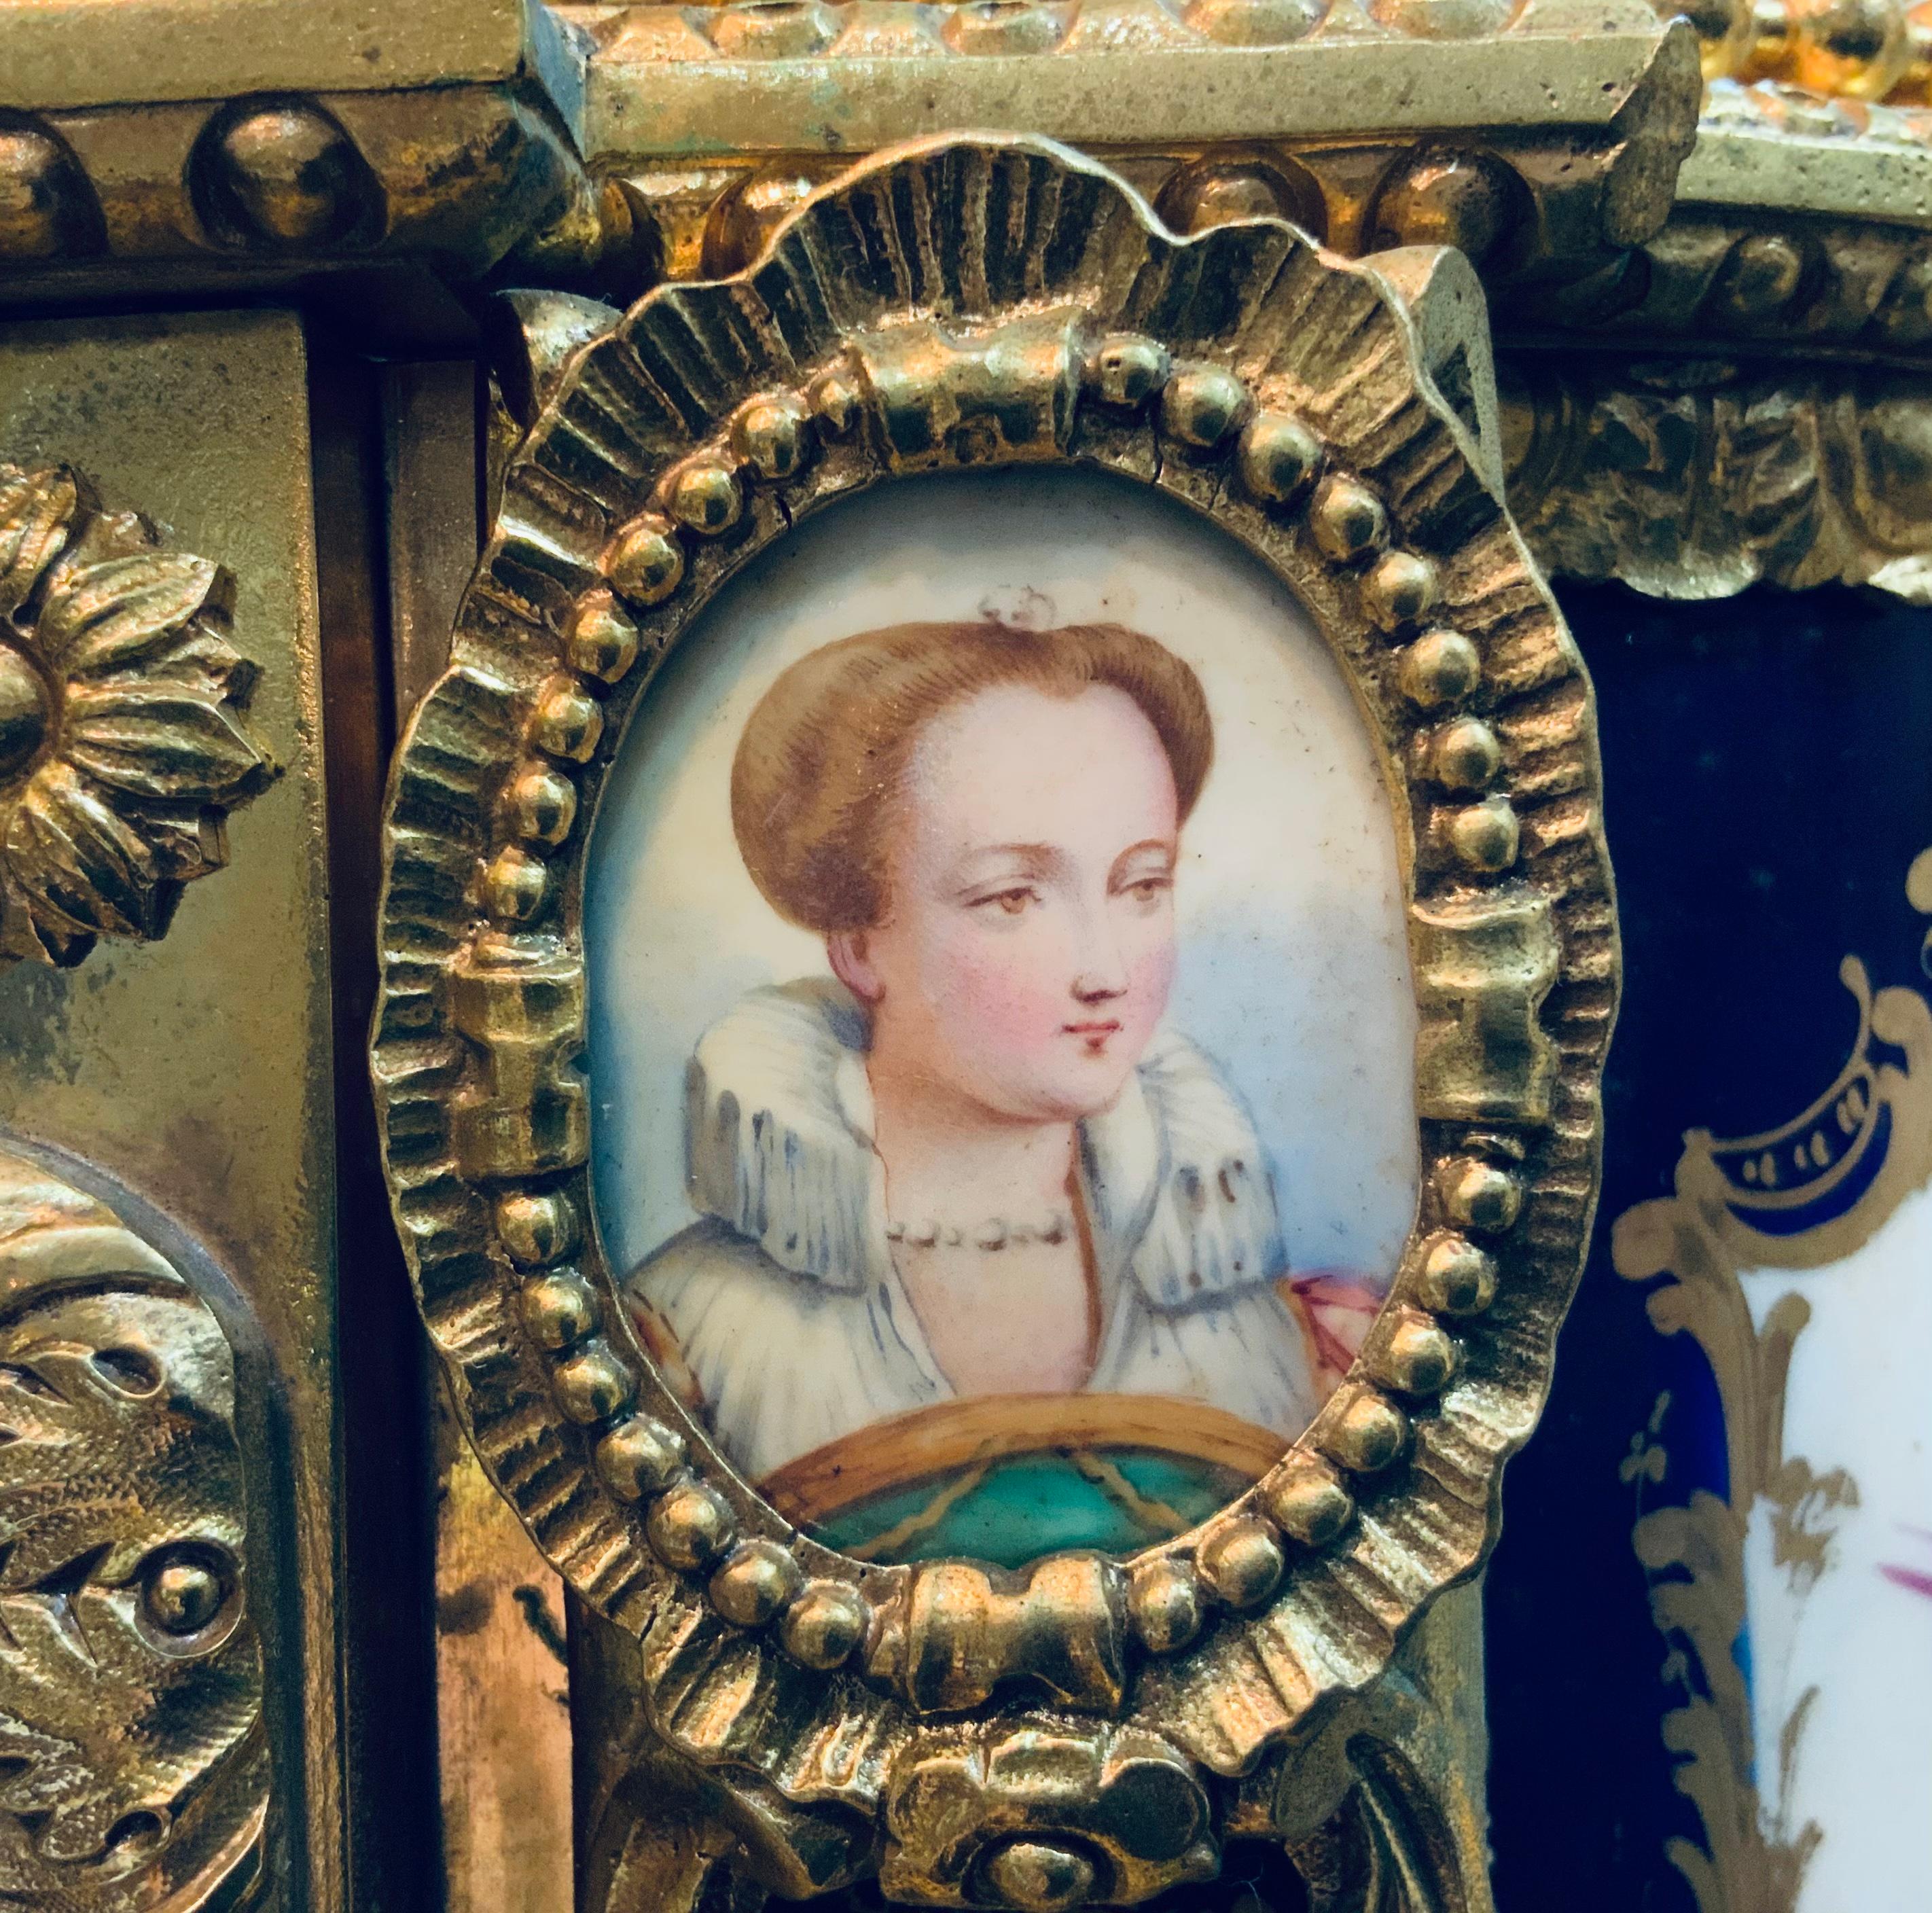 This is a Napoleon lll gilt bronze mounted Sevres style porcelain mantel clock/ garniture. It depicts a porcelain with a cobalt blue background hand painted of cartouches with different scenes of pair of cherubs, courting couples, a maid in a garden